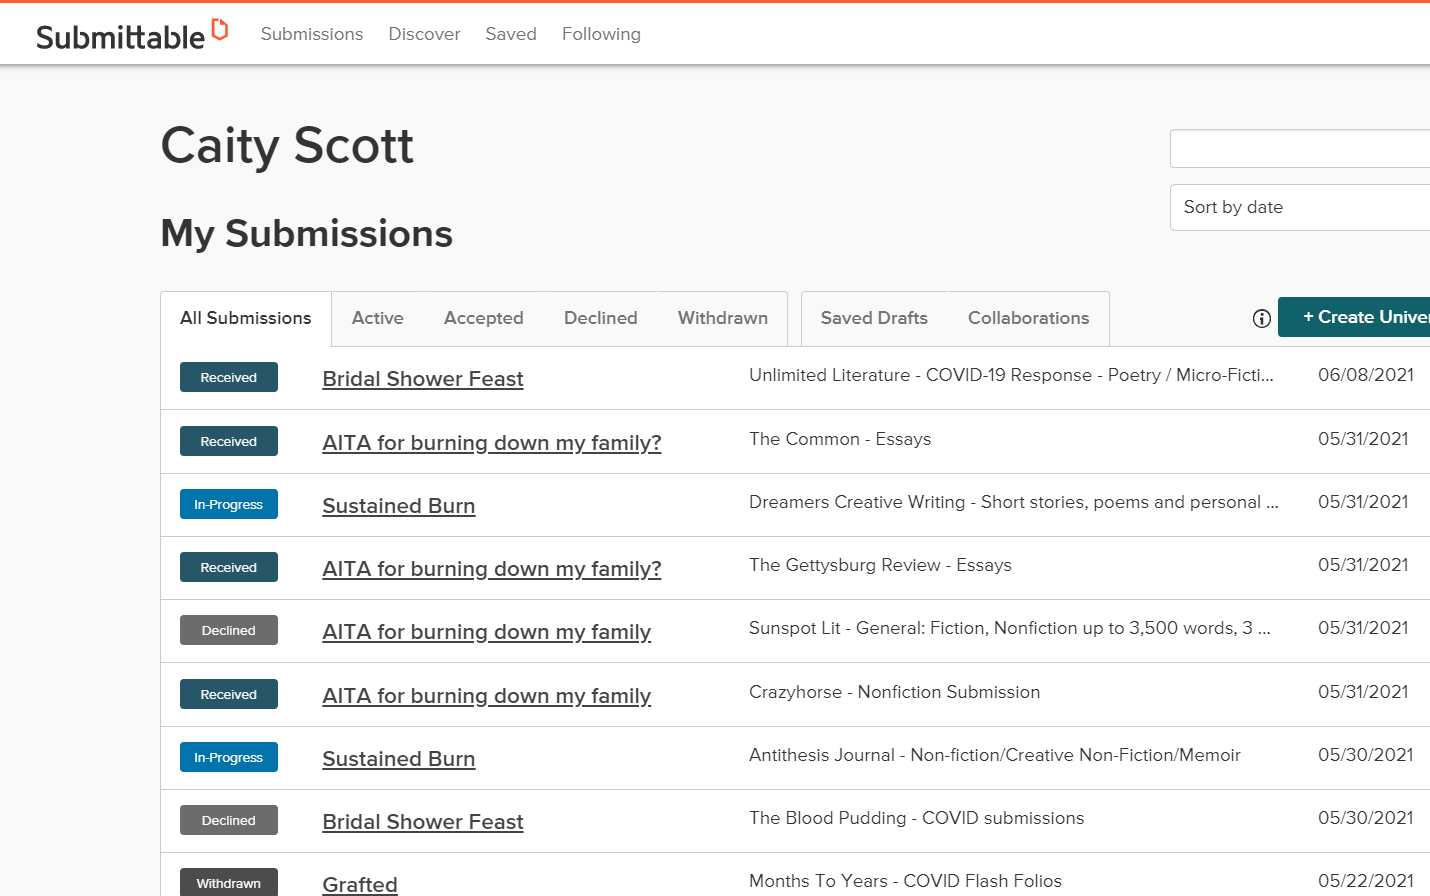 Submittable's home page displaying the name "Caity Scott" and a list of submitted pieces, where they were submitted, their status, and the submission date